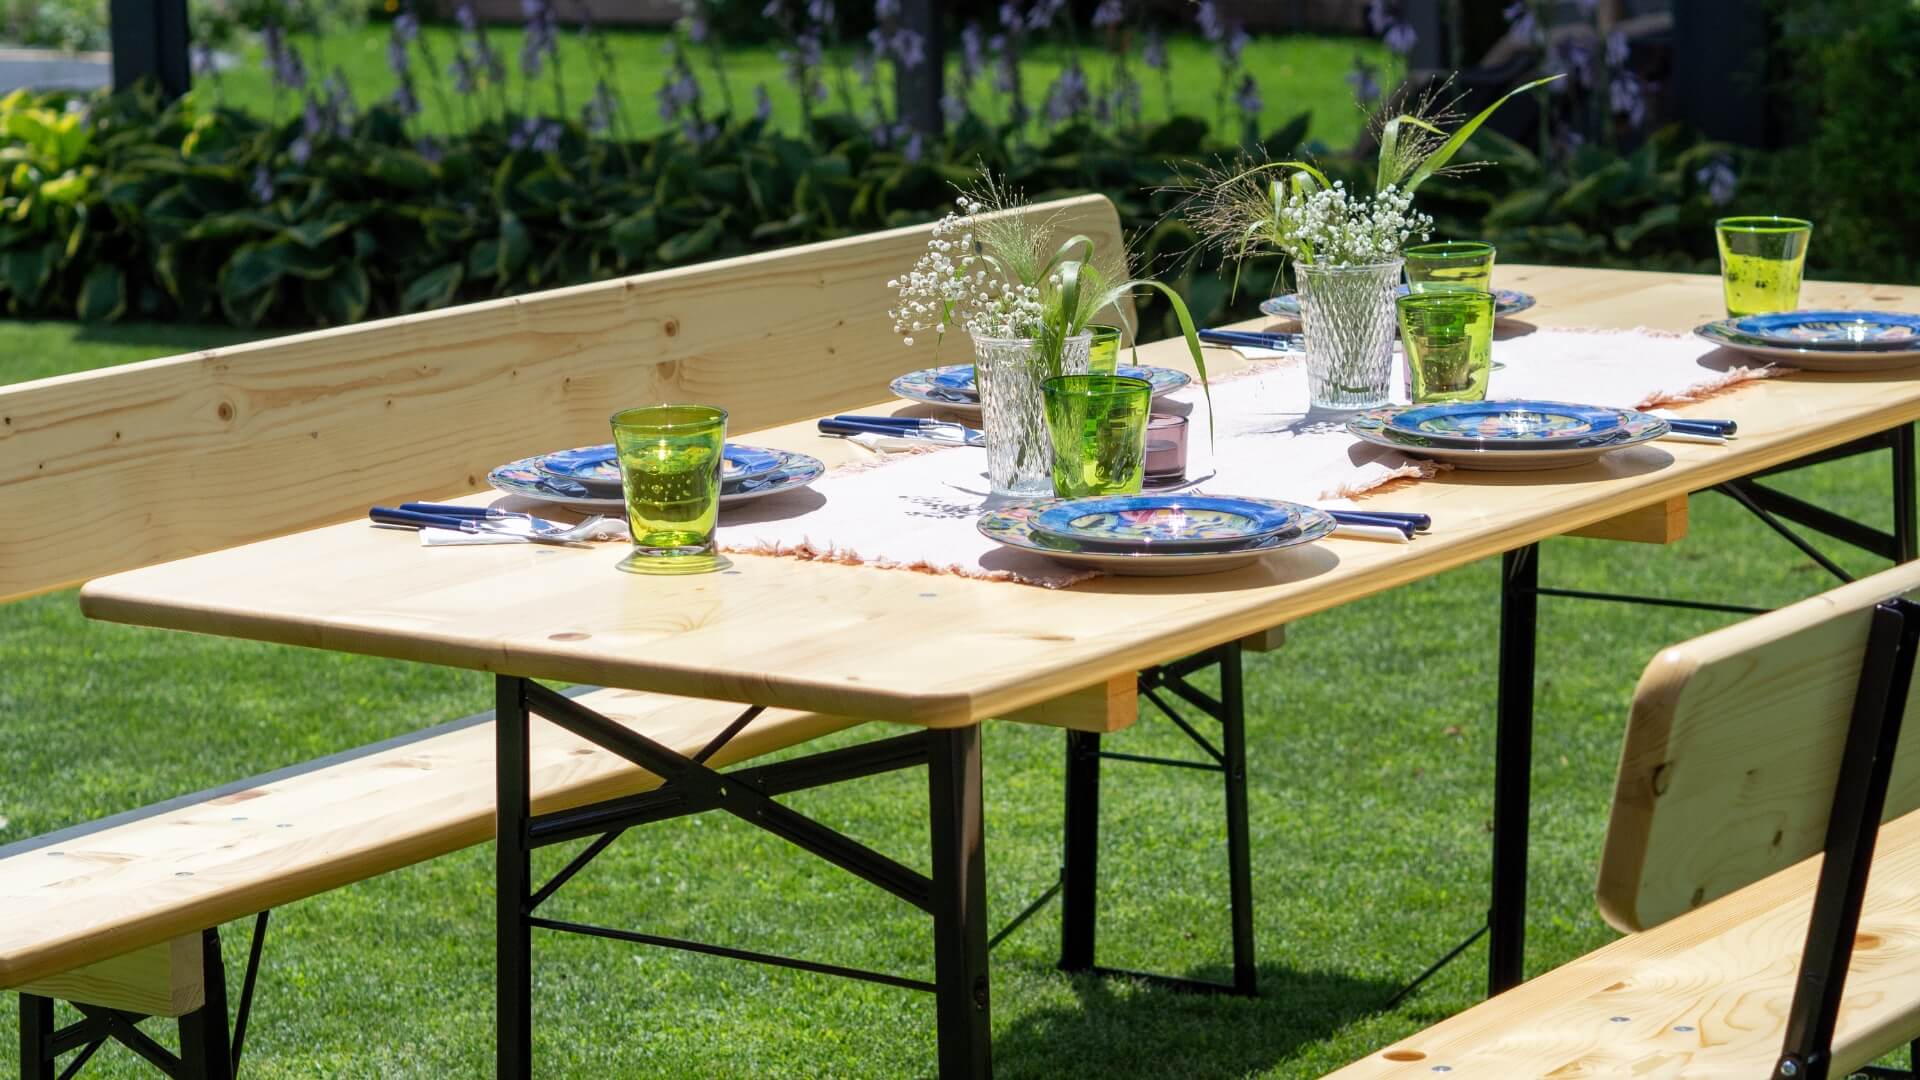 The wide beer garden table set in nature has been lovingly decorated for a meal in the garden.